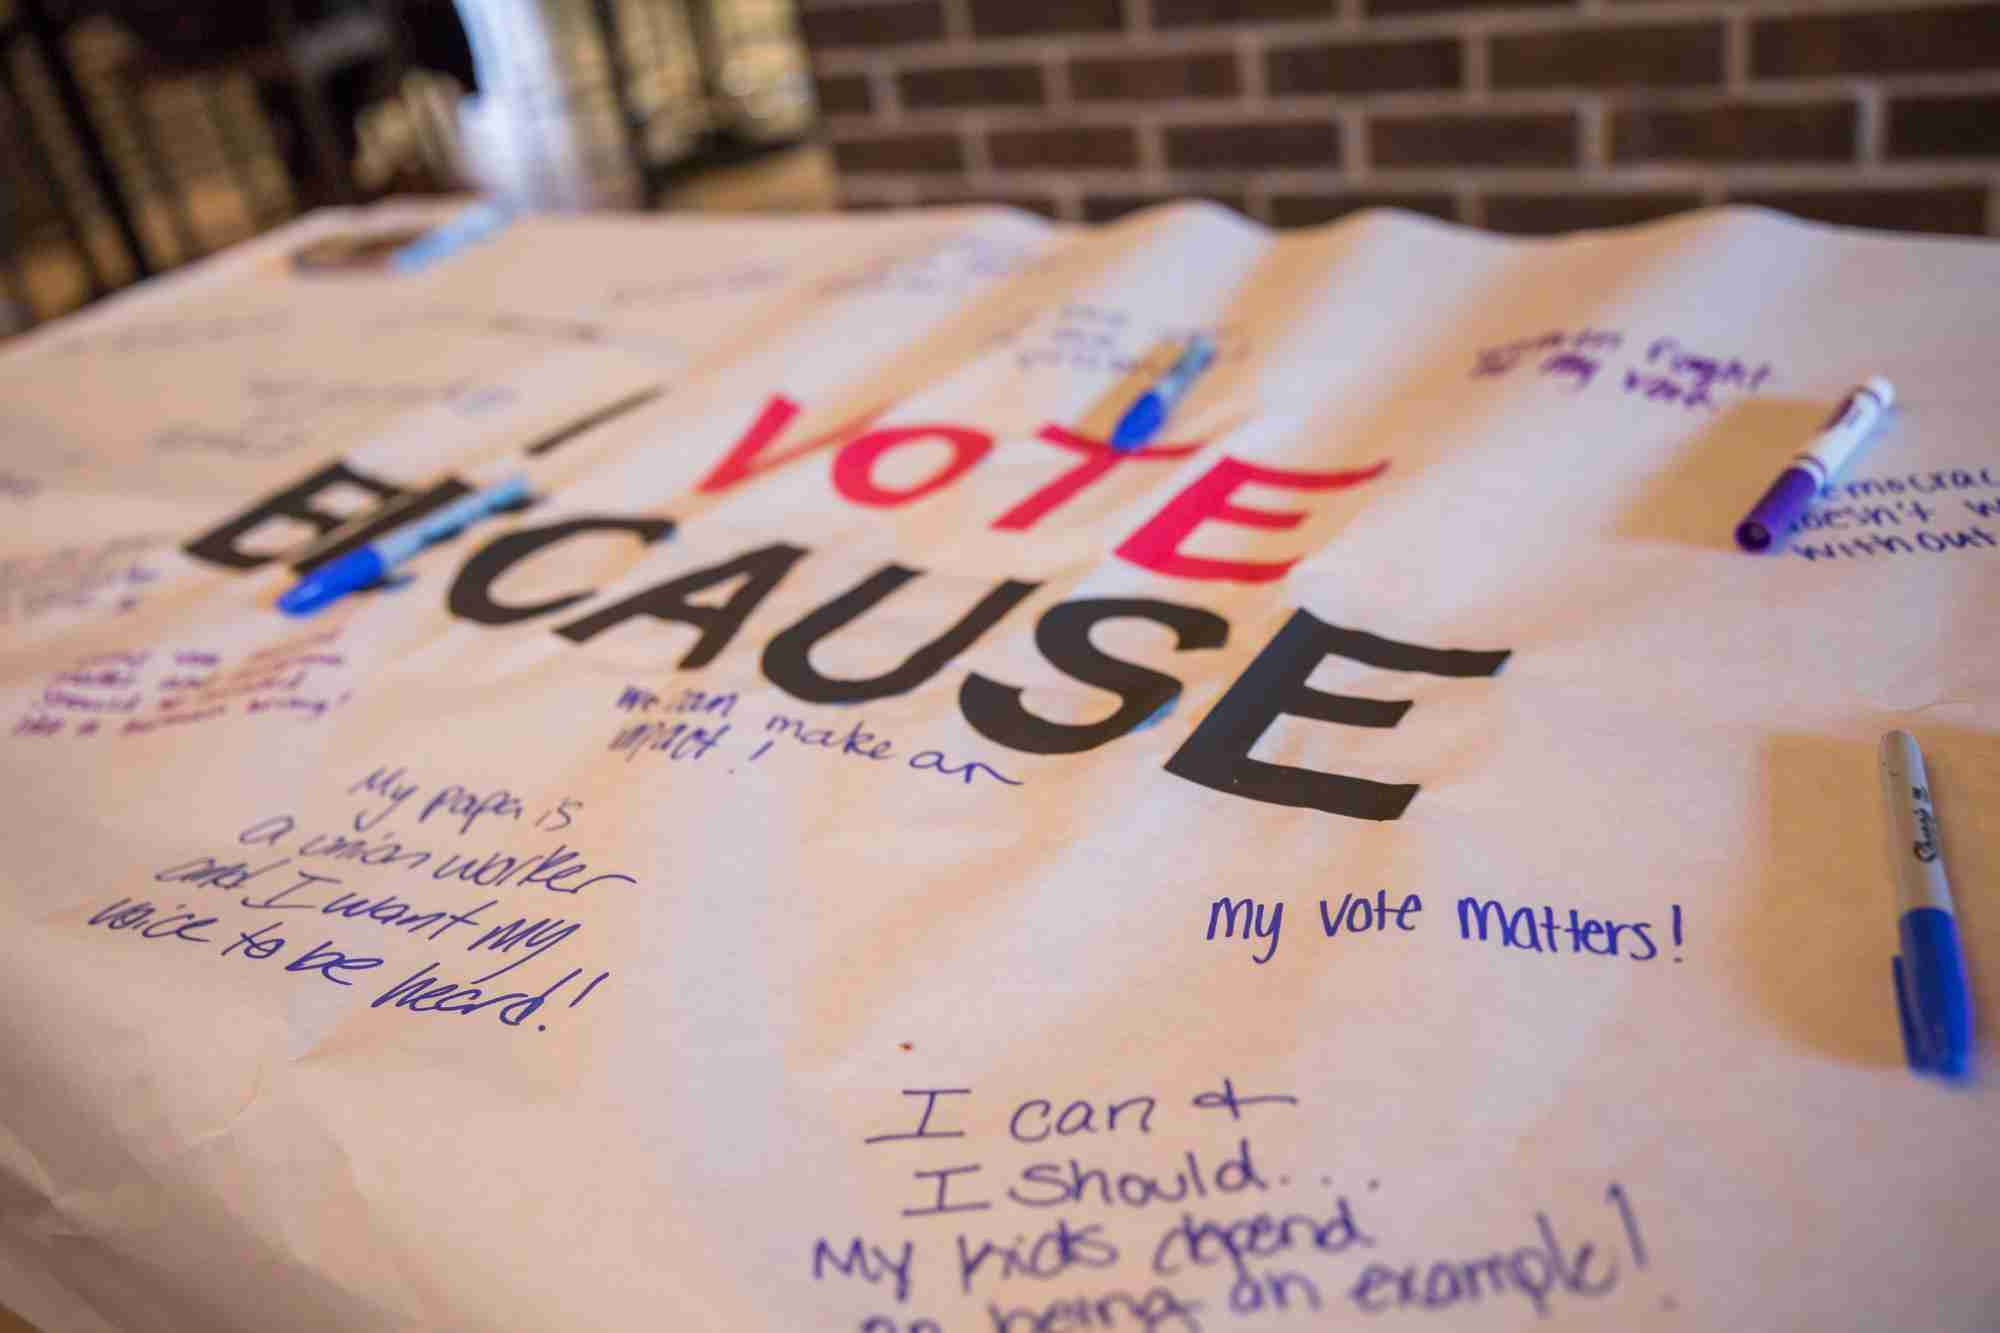 A white banner with text that reads "I vote because" with assorted handwritten messages